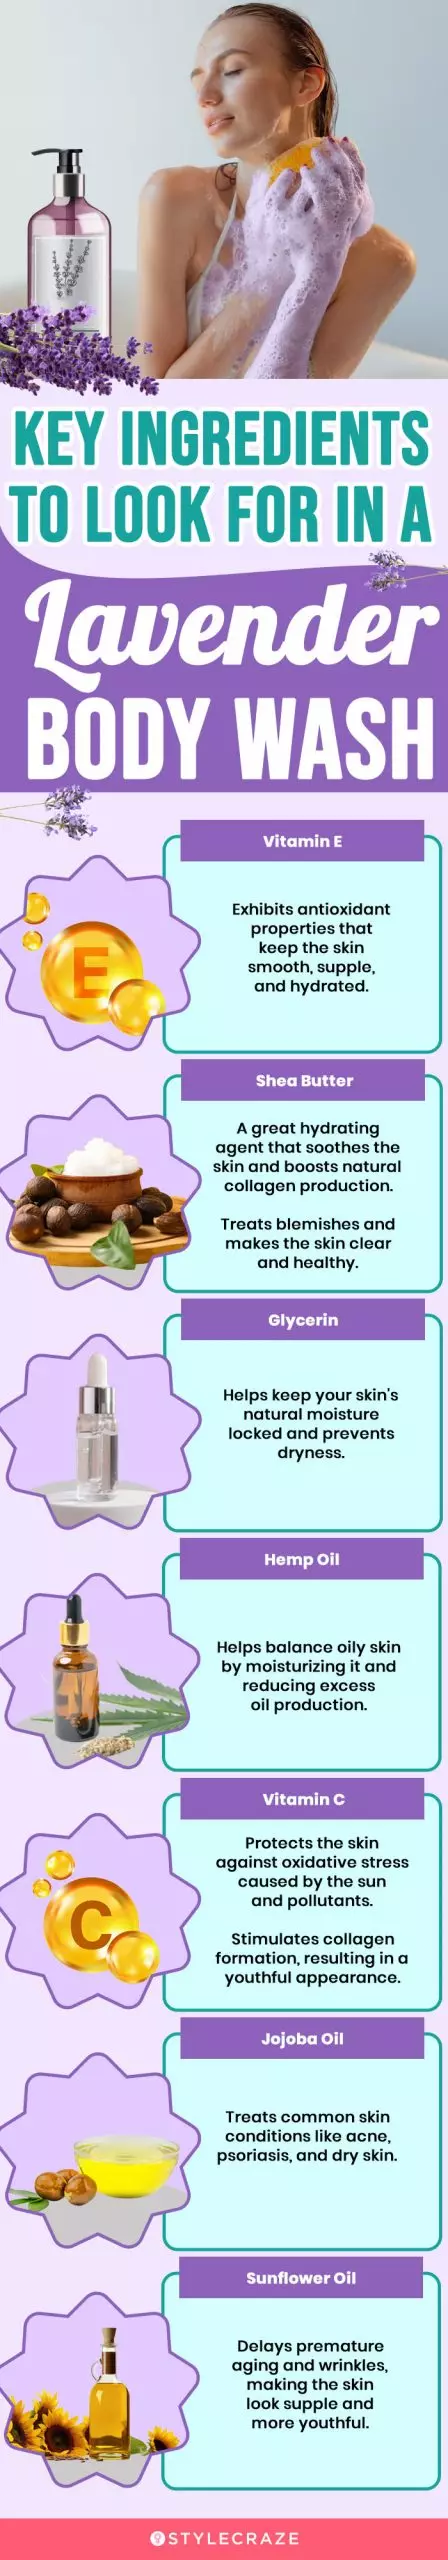 Key Ingredients To Look For In A Lavender Body Wash (infographic)